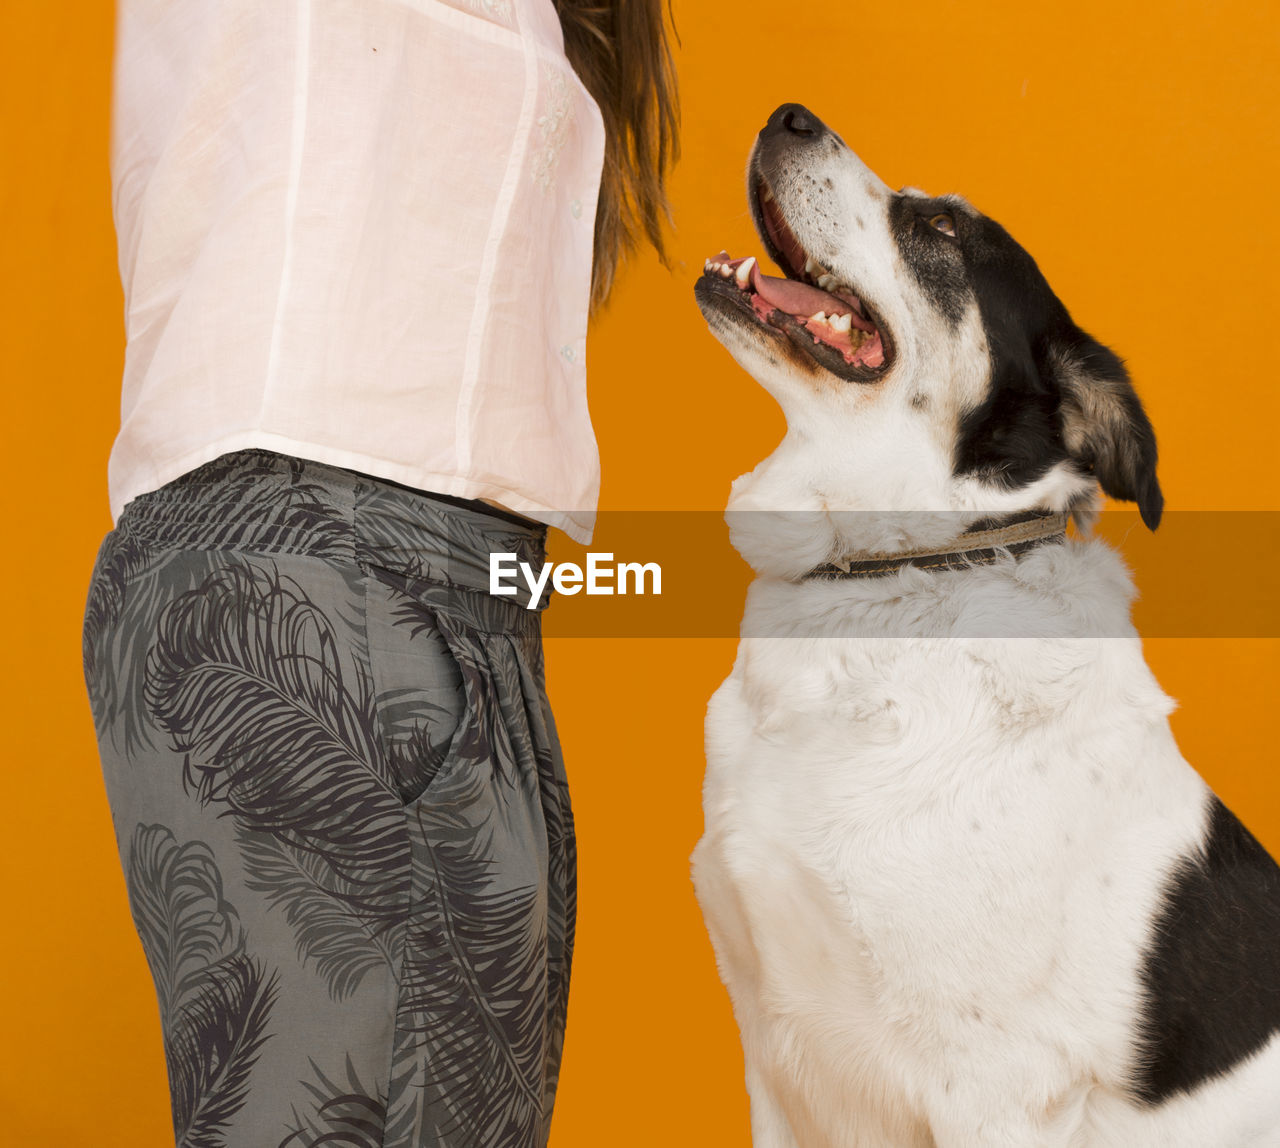 Midsection of woman with dog against orange background